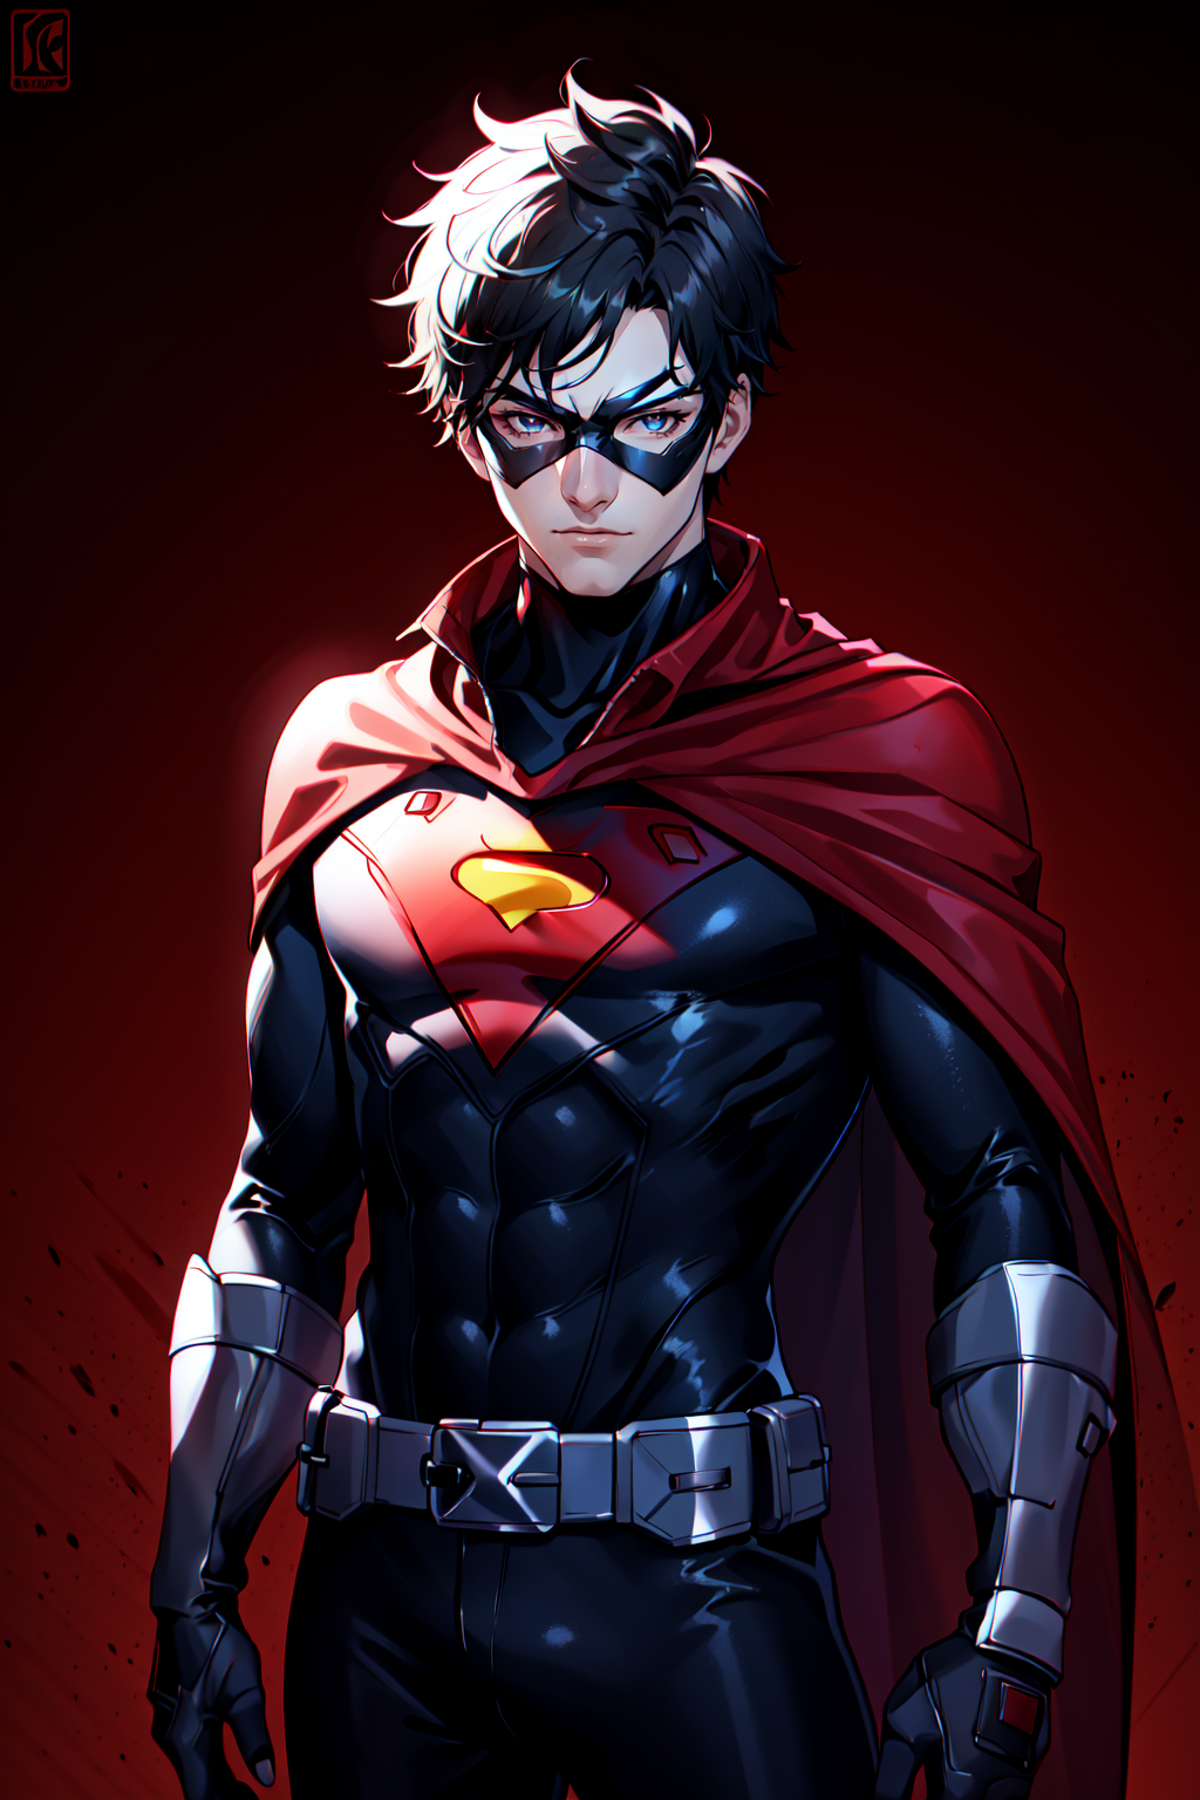 A superhero comic book illustration of a man in a red cape.